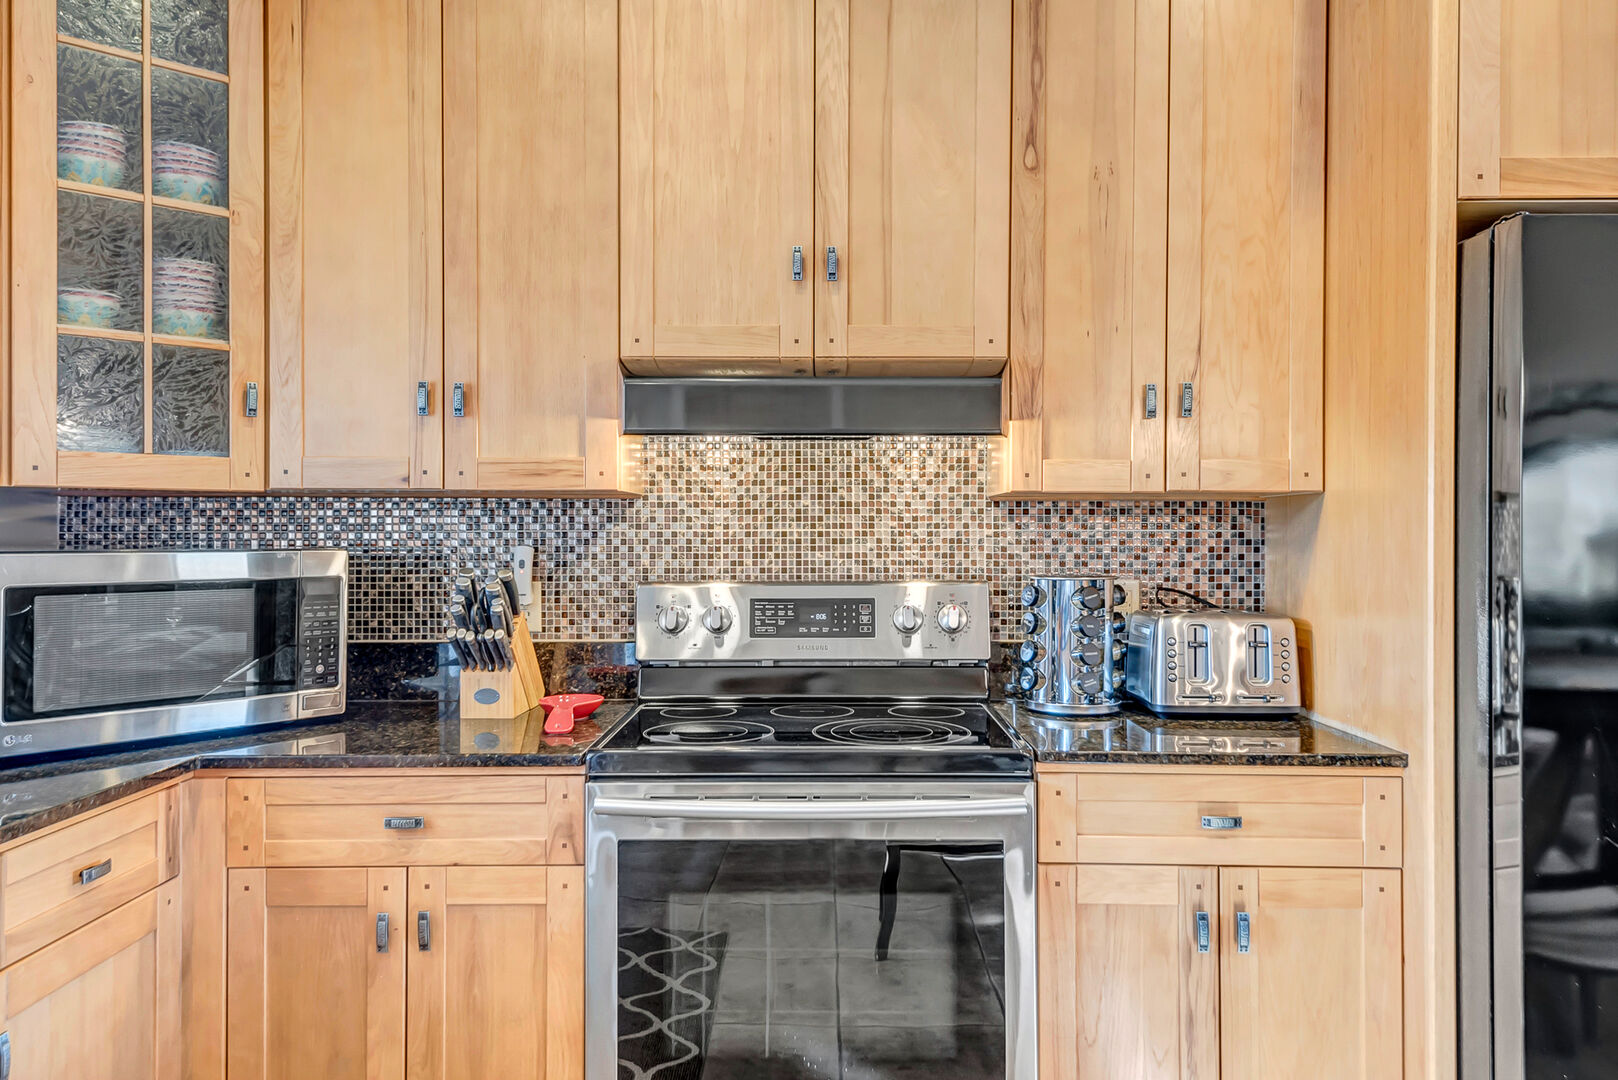 Stainless steel appliances and 6-burner stove